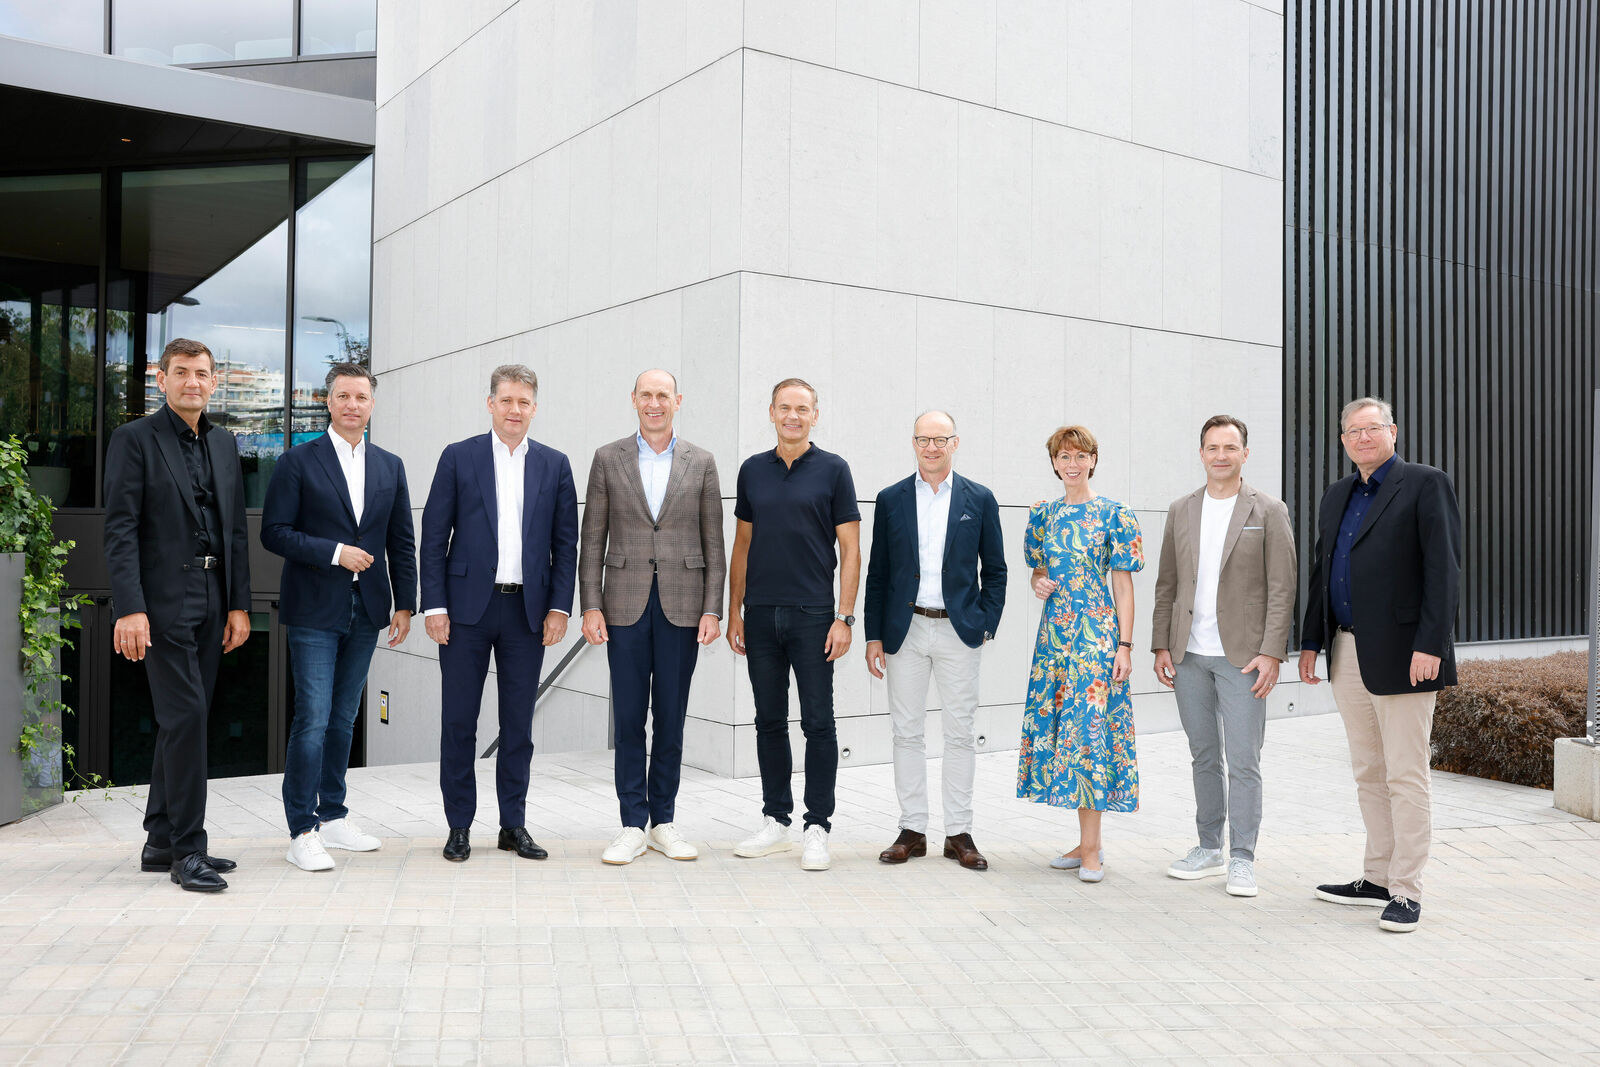 Board of Management of the Volkswagen Group: group of people standing side by side in front of a building